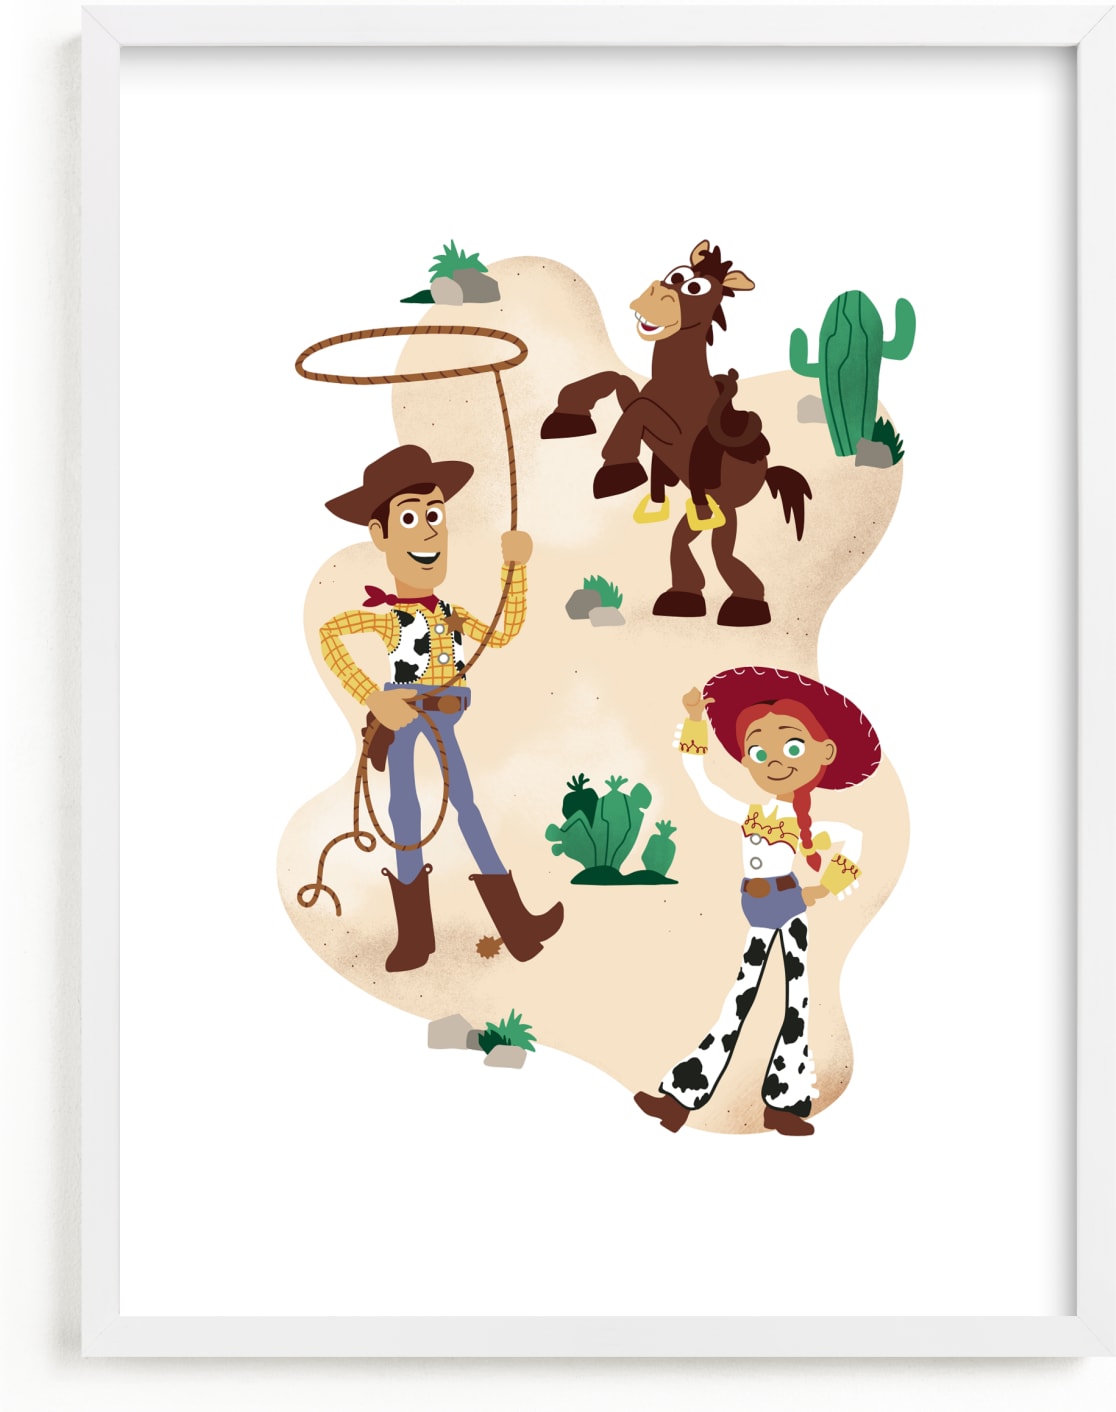 This is a colorful disney art by Katie Zimpel called Disney and Pixar Toy Story Woody's Roundup.